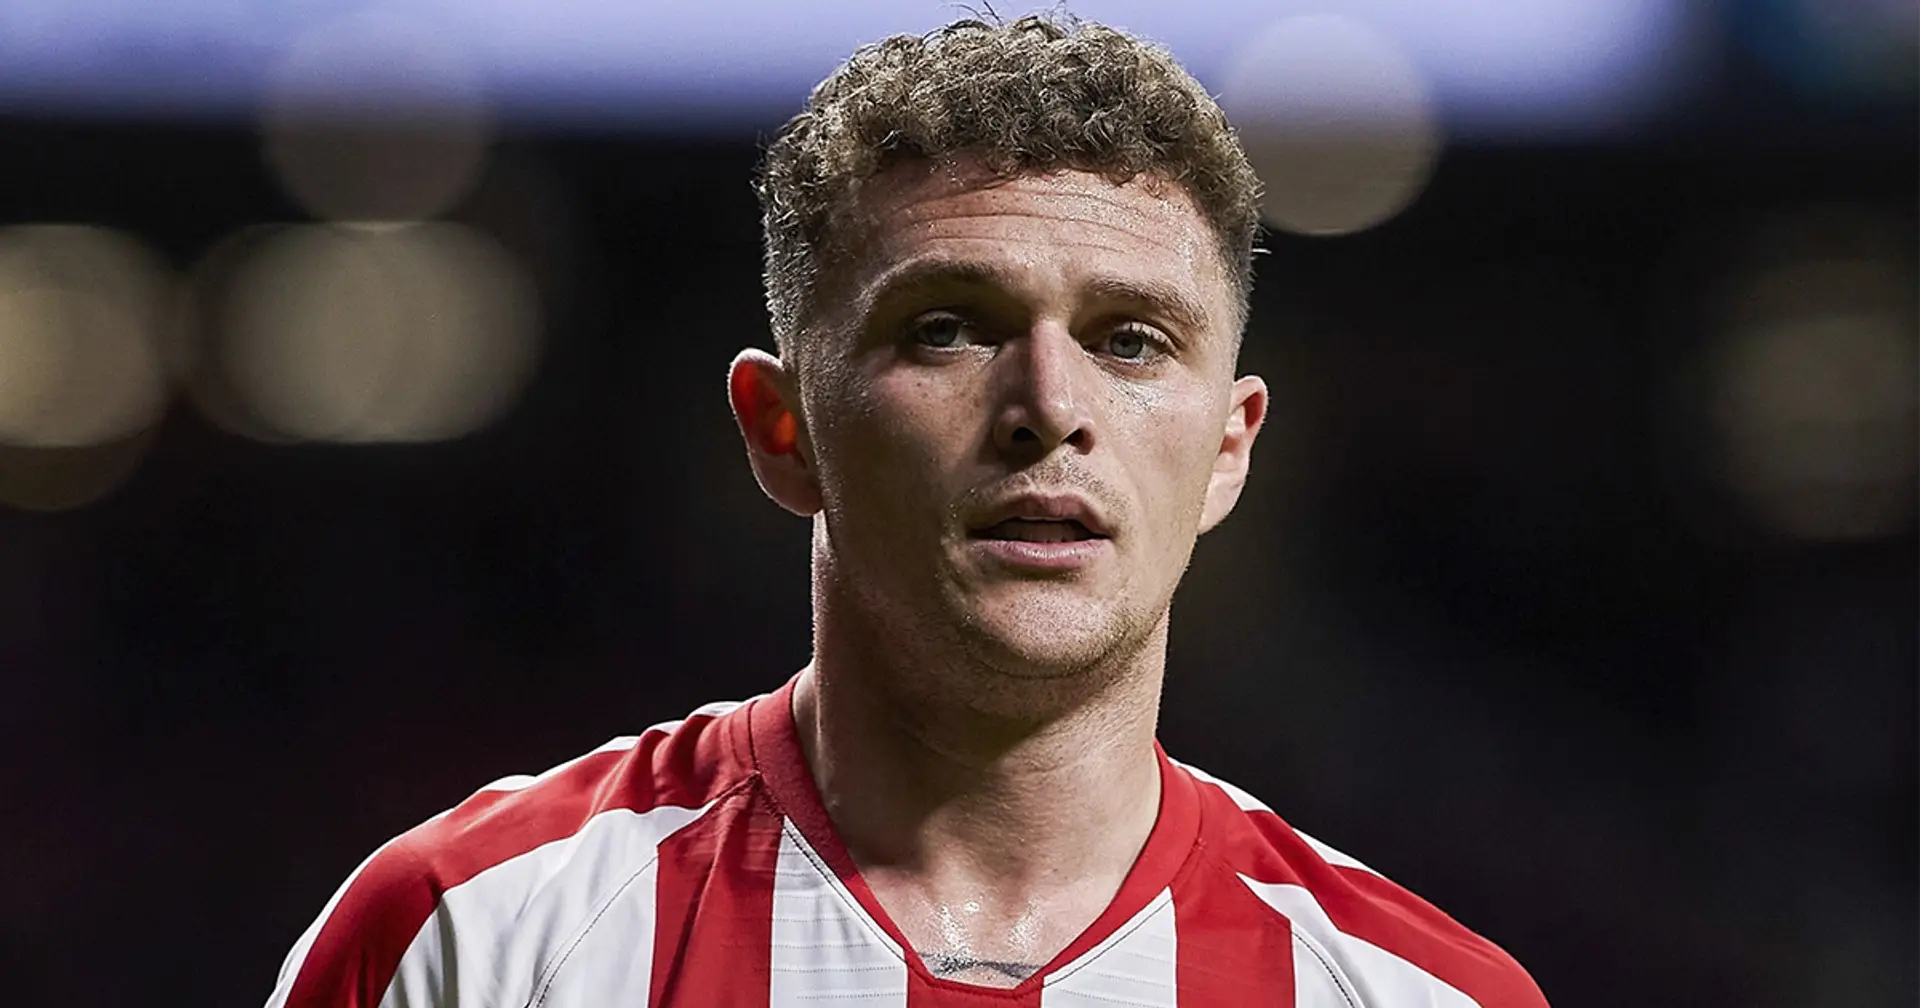 'If you go toe-to-toe with Liverpool, you're going to get beat 6-0': Trippier defends Atletico tactics against post-Anfield criticism